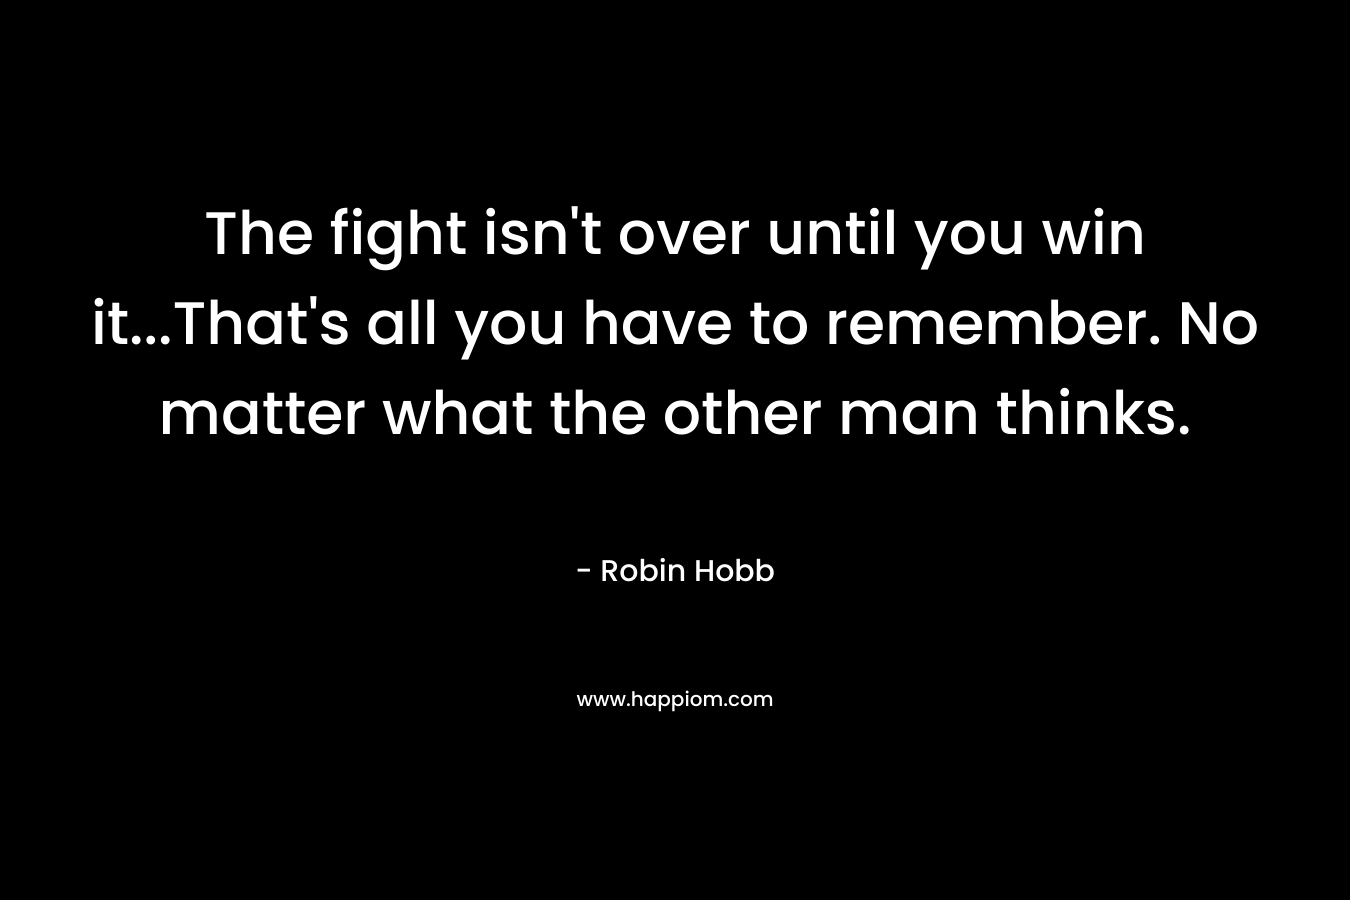 The fight isn't over until you win it...That's all you have to remember. No matter what the other man thinks.